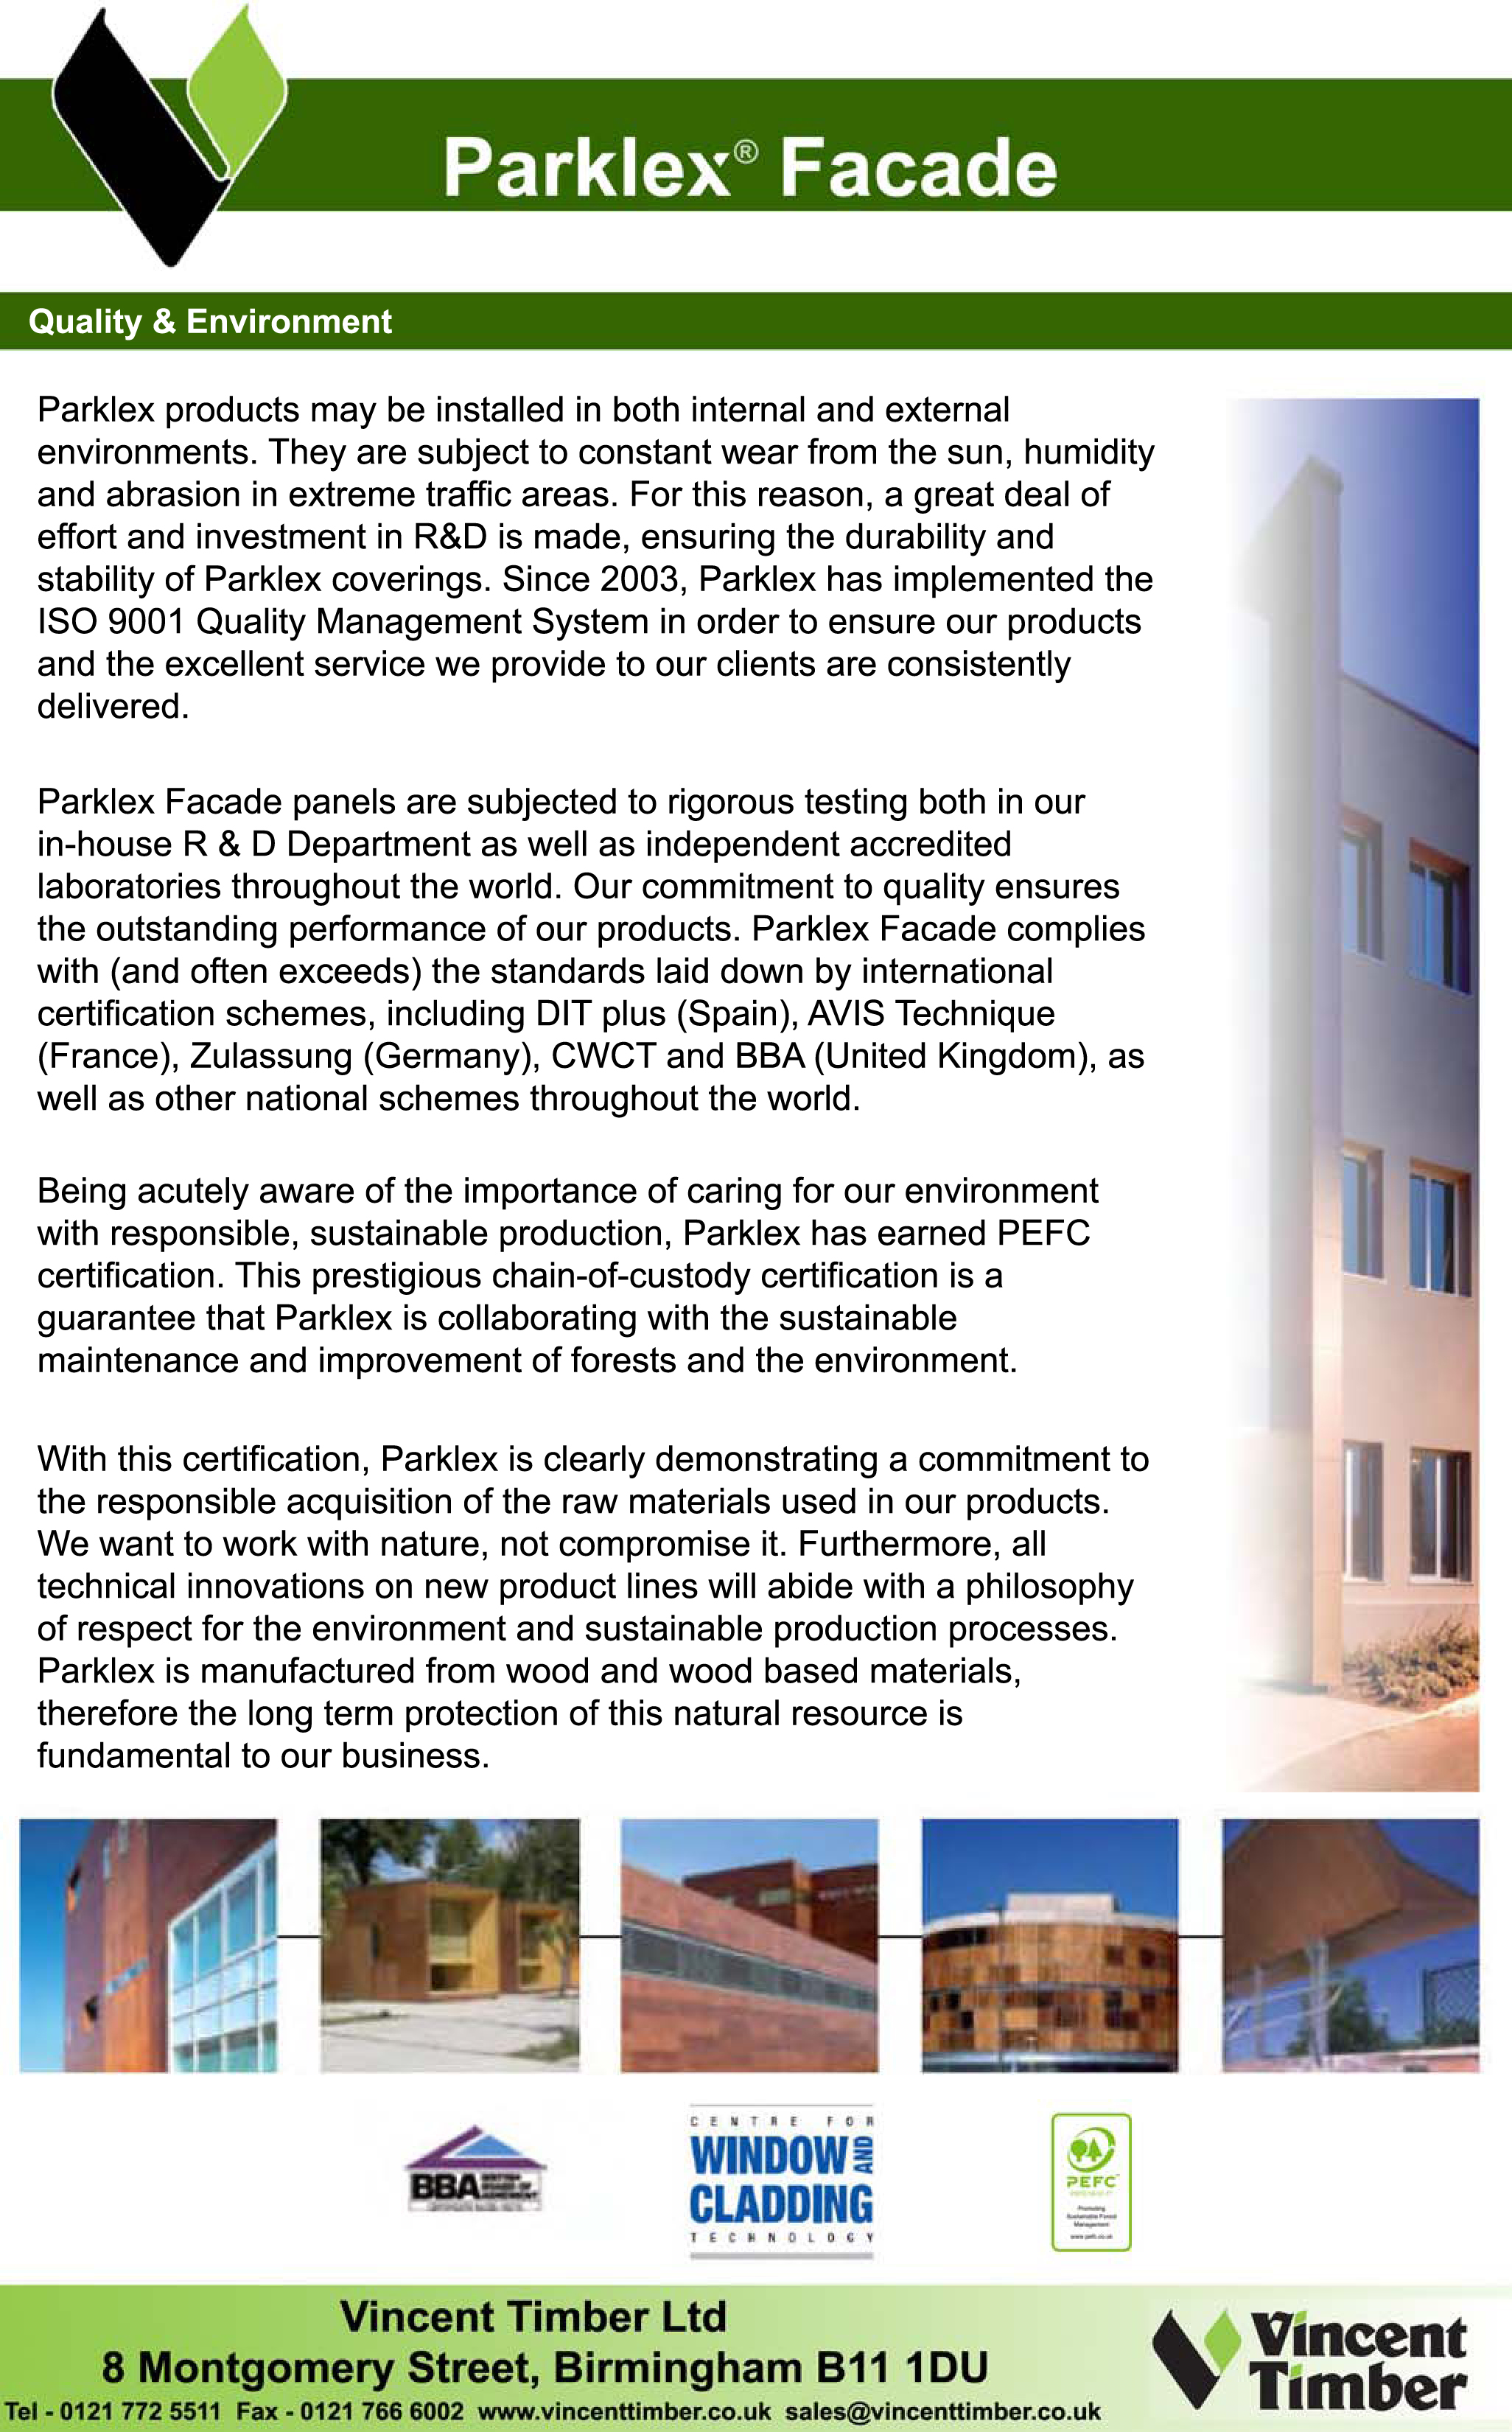 Quality and Environment aspects of Parklex Facade